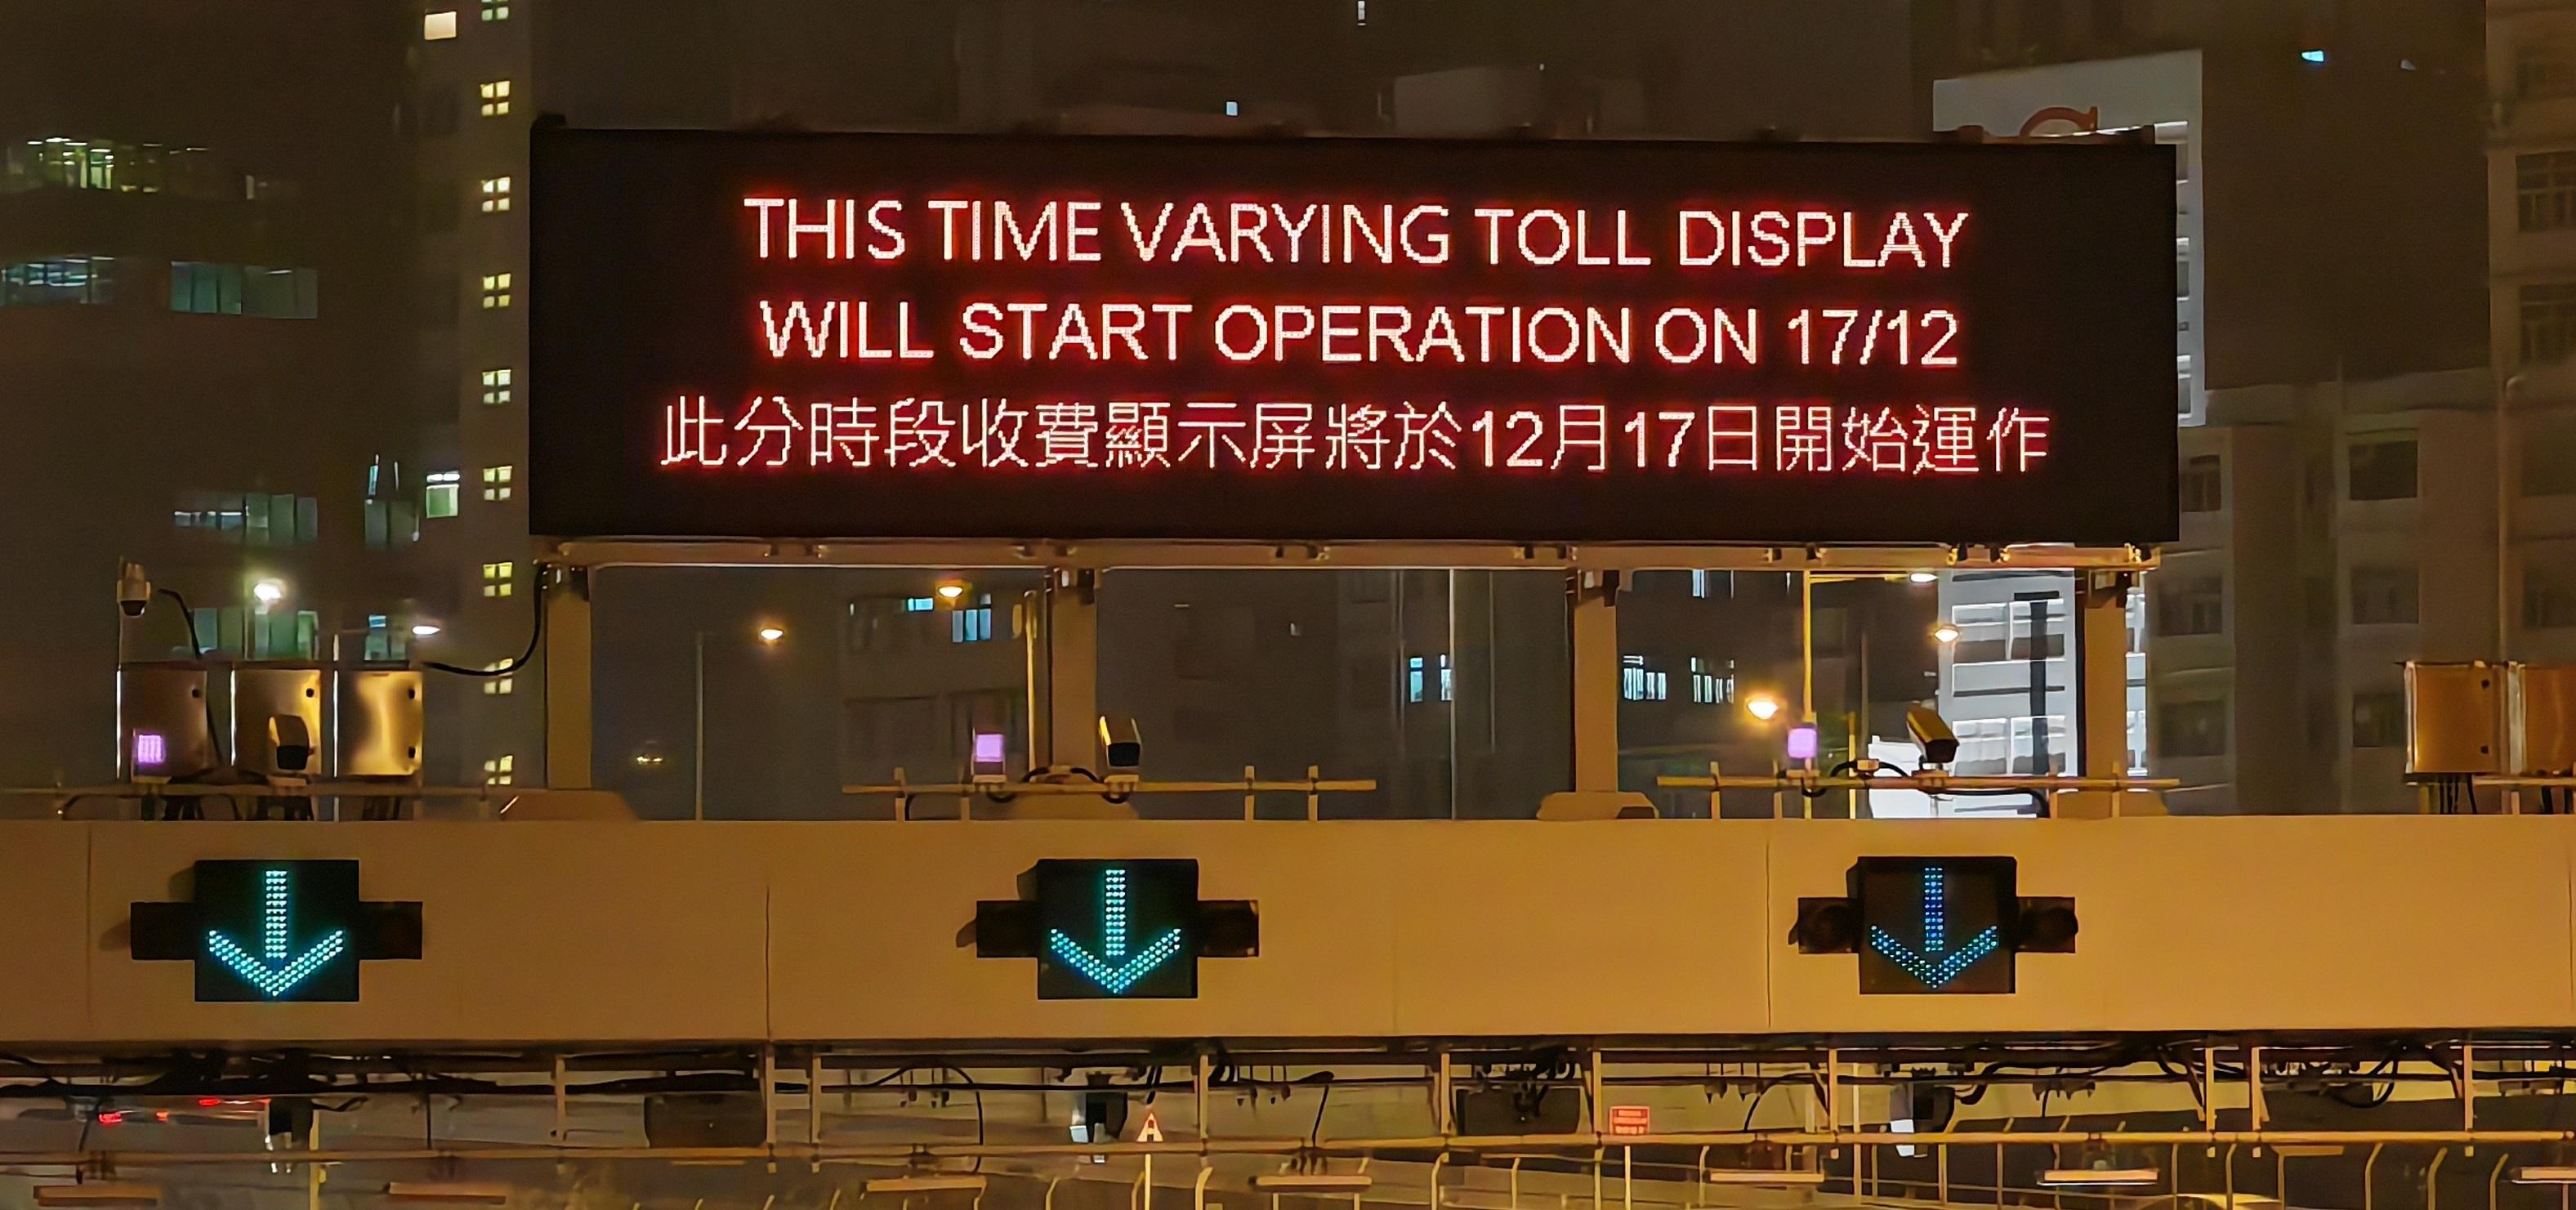 The Transport Department said today (December 7) that the new toll information displays installed in both directions of the three road harbour crossings (RHCs) have shown relevant promotional information, allowing drivers to be aware of the toll point locations at the RHCs in advance and to get prepared for the time-varying tolls. Figure shows the newly installed toll information display at the Western Harbour Crossing.